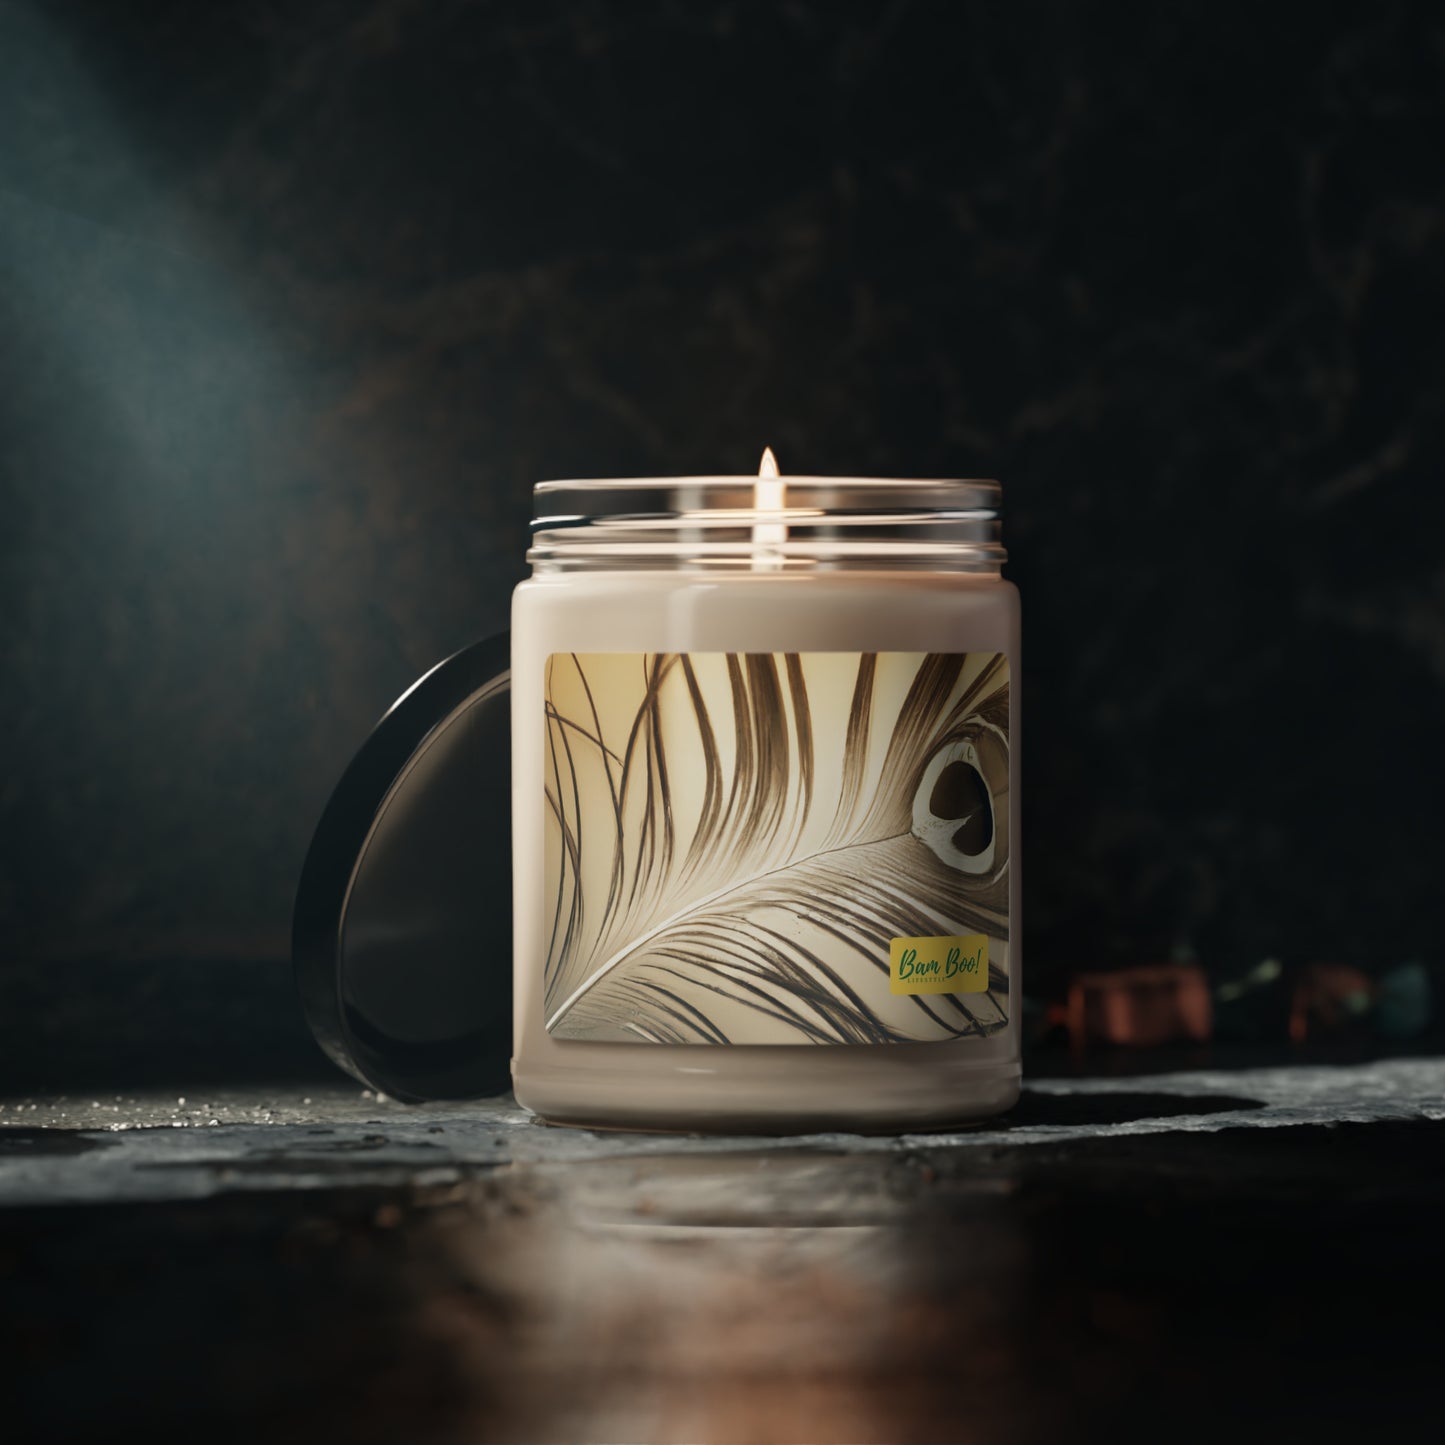 "Nature's Allure: Exploring the Splendor of the World around Us." - Bam Boo! Lifestyle Eco-friendly Soy Candle